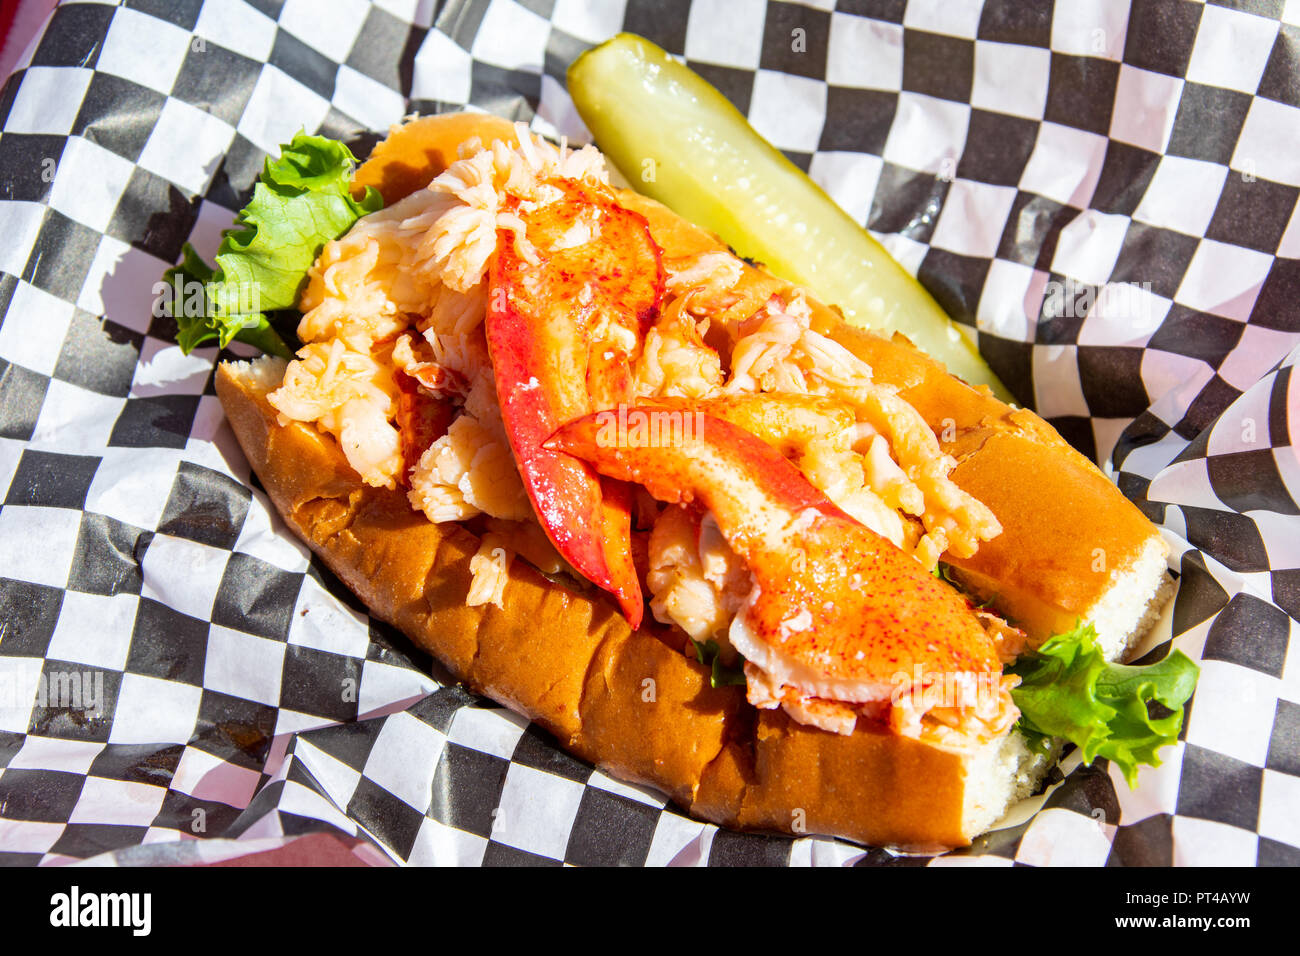 Lobster Roll at Charlotte's Legendary Lobster Pound Restaurant, Seawall, Maine Stock Photo